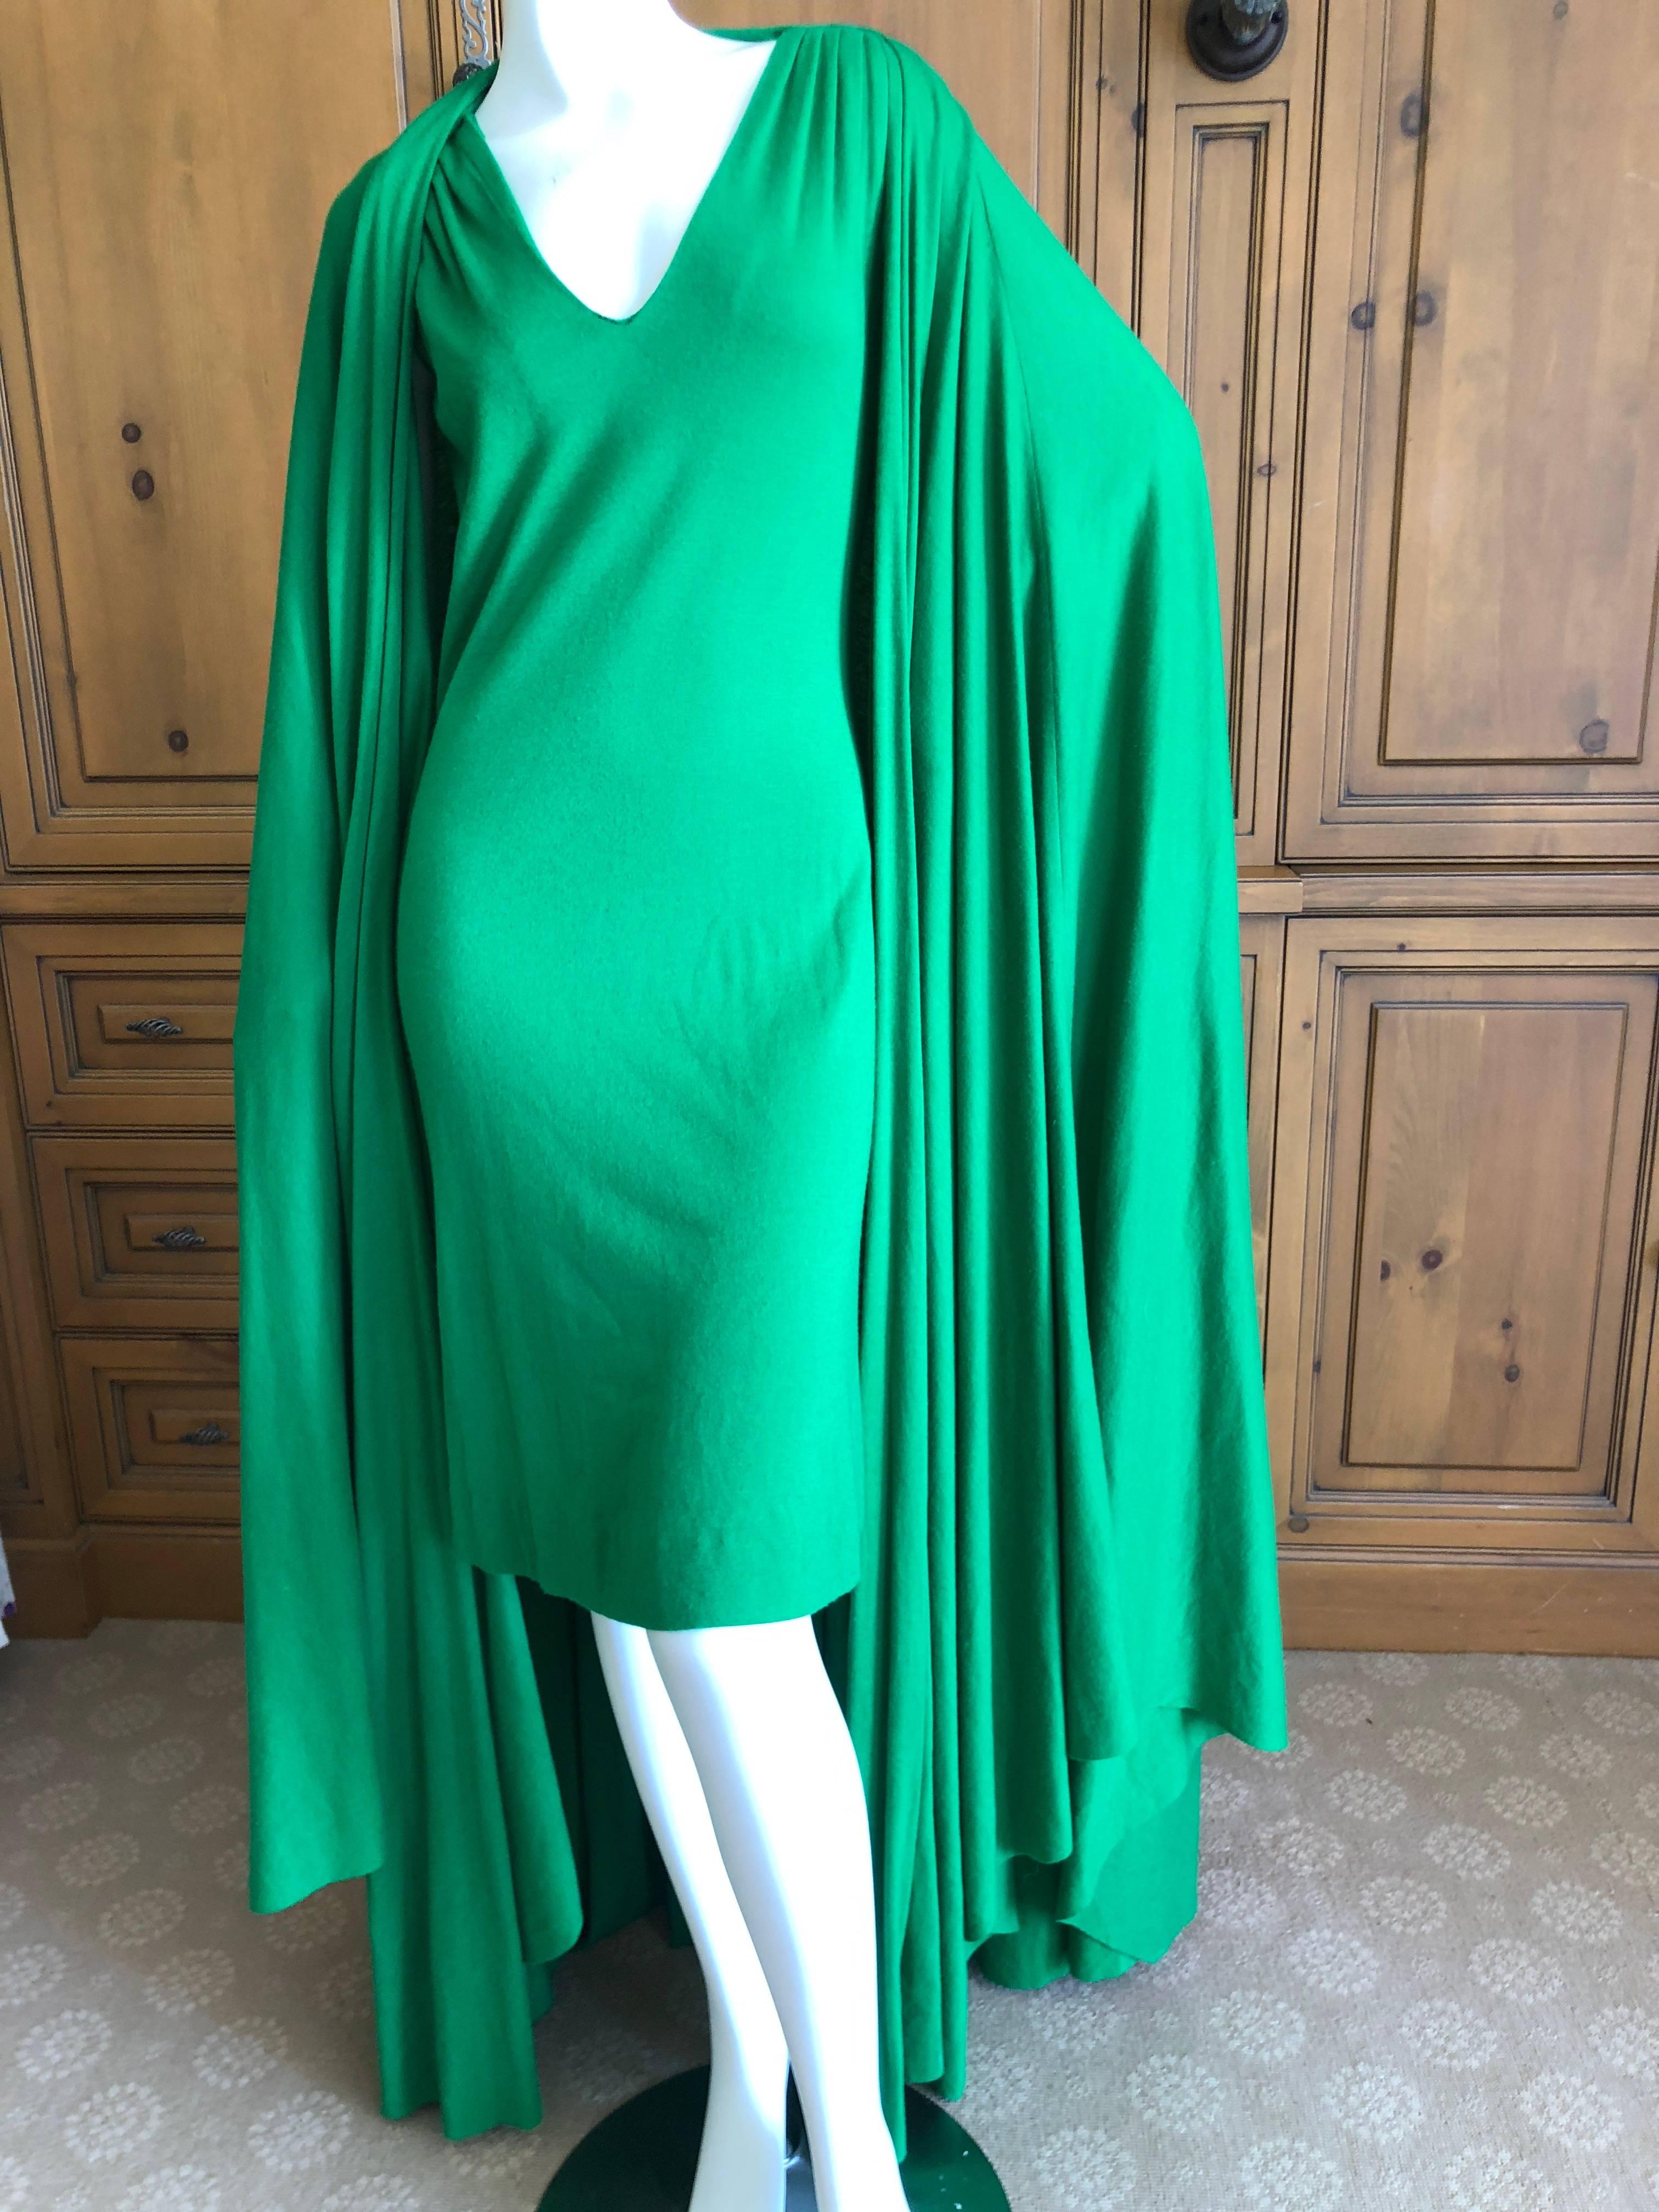 Cardinali Luxurious Lime Green Cashmere Dress and Matching Cape For Sale 1